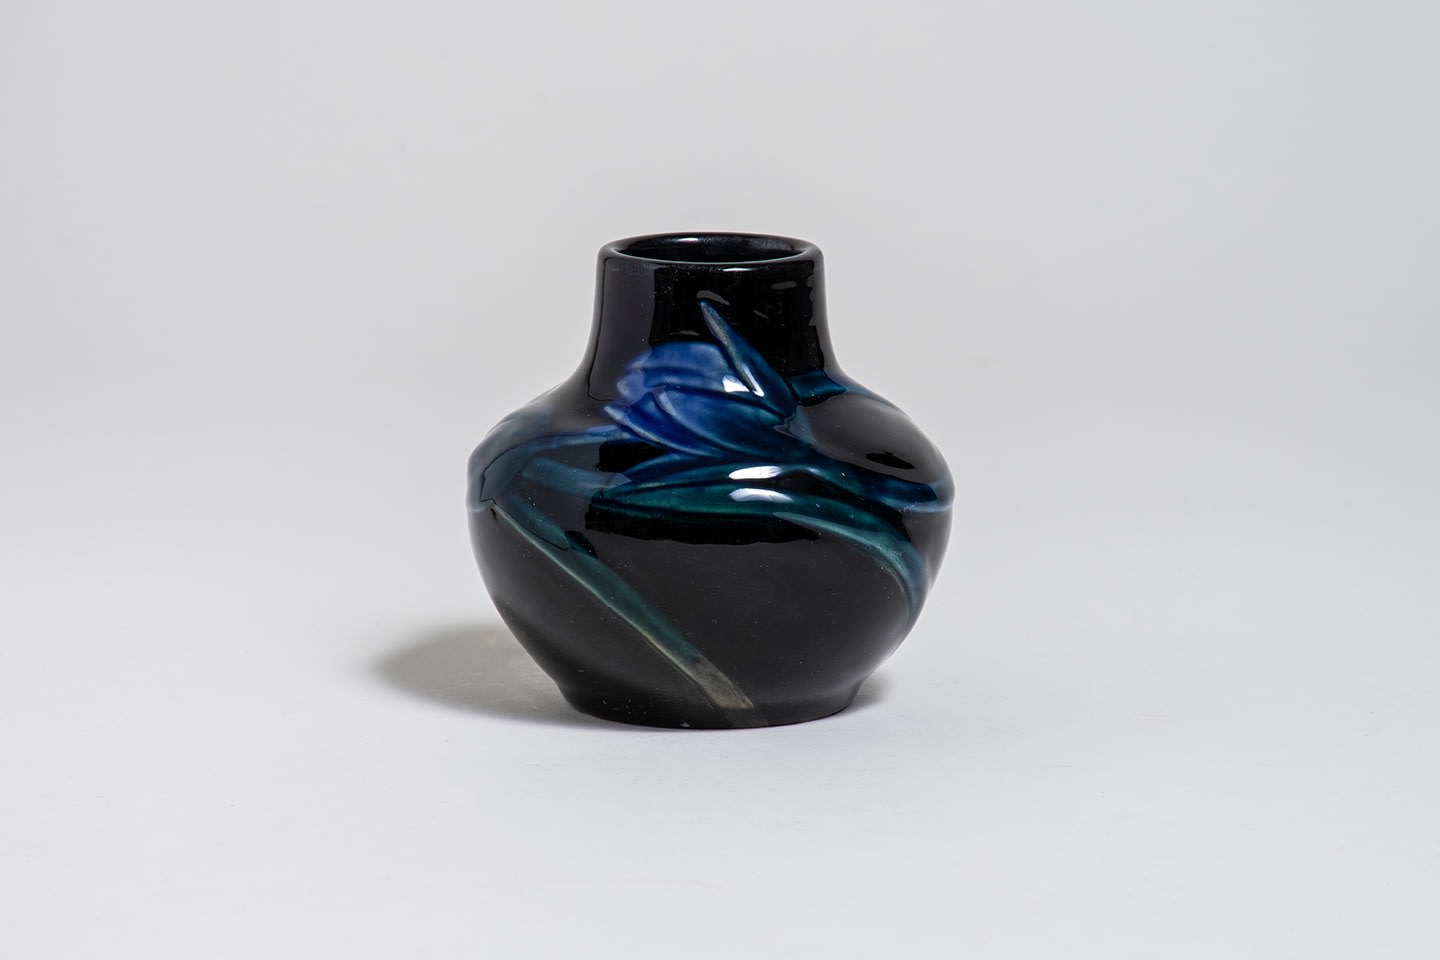 a black cabinet vase with rounded body, decorated with raised relief motif of dark blue crocuses with green stems and leaves, against a black ground, with glossy clear glaze